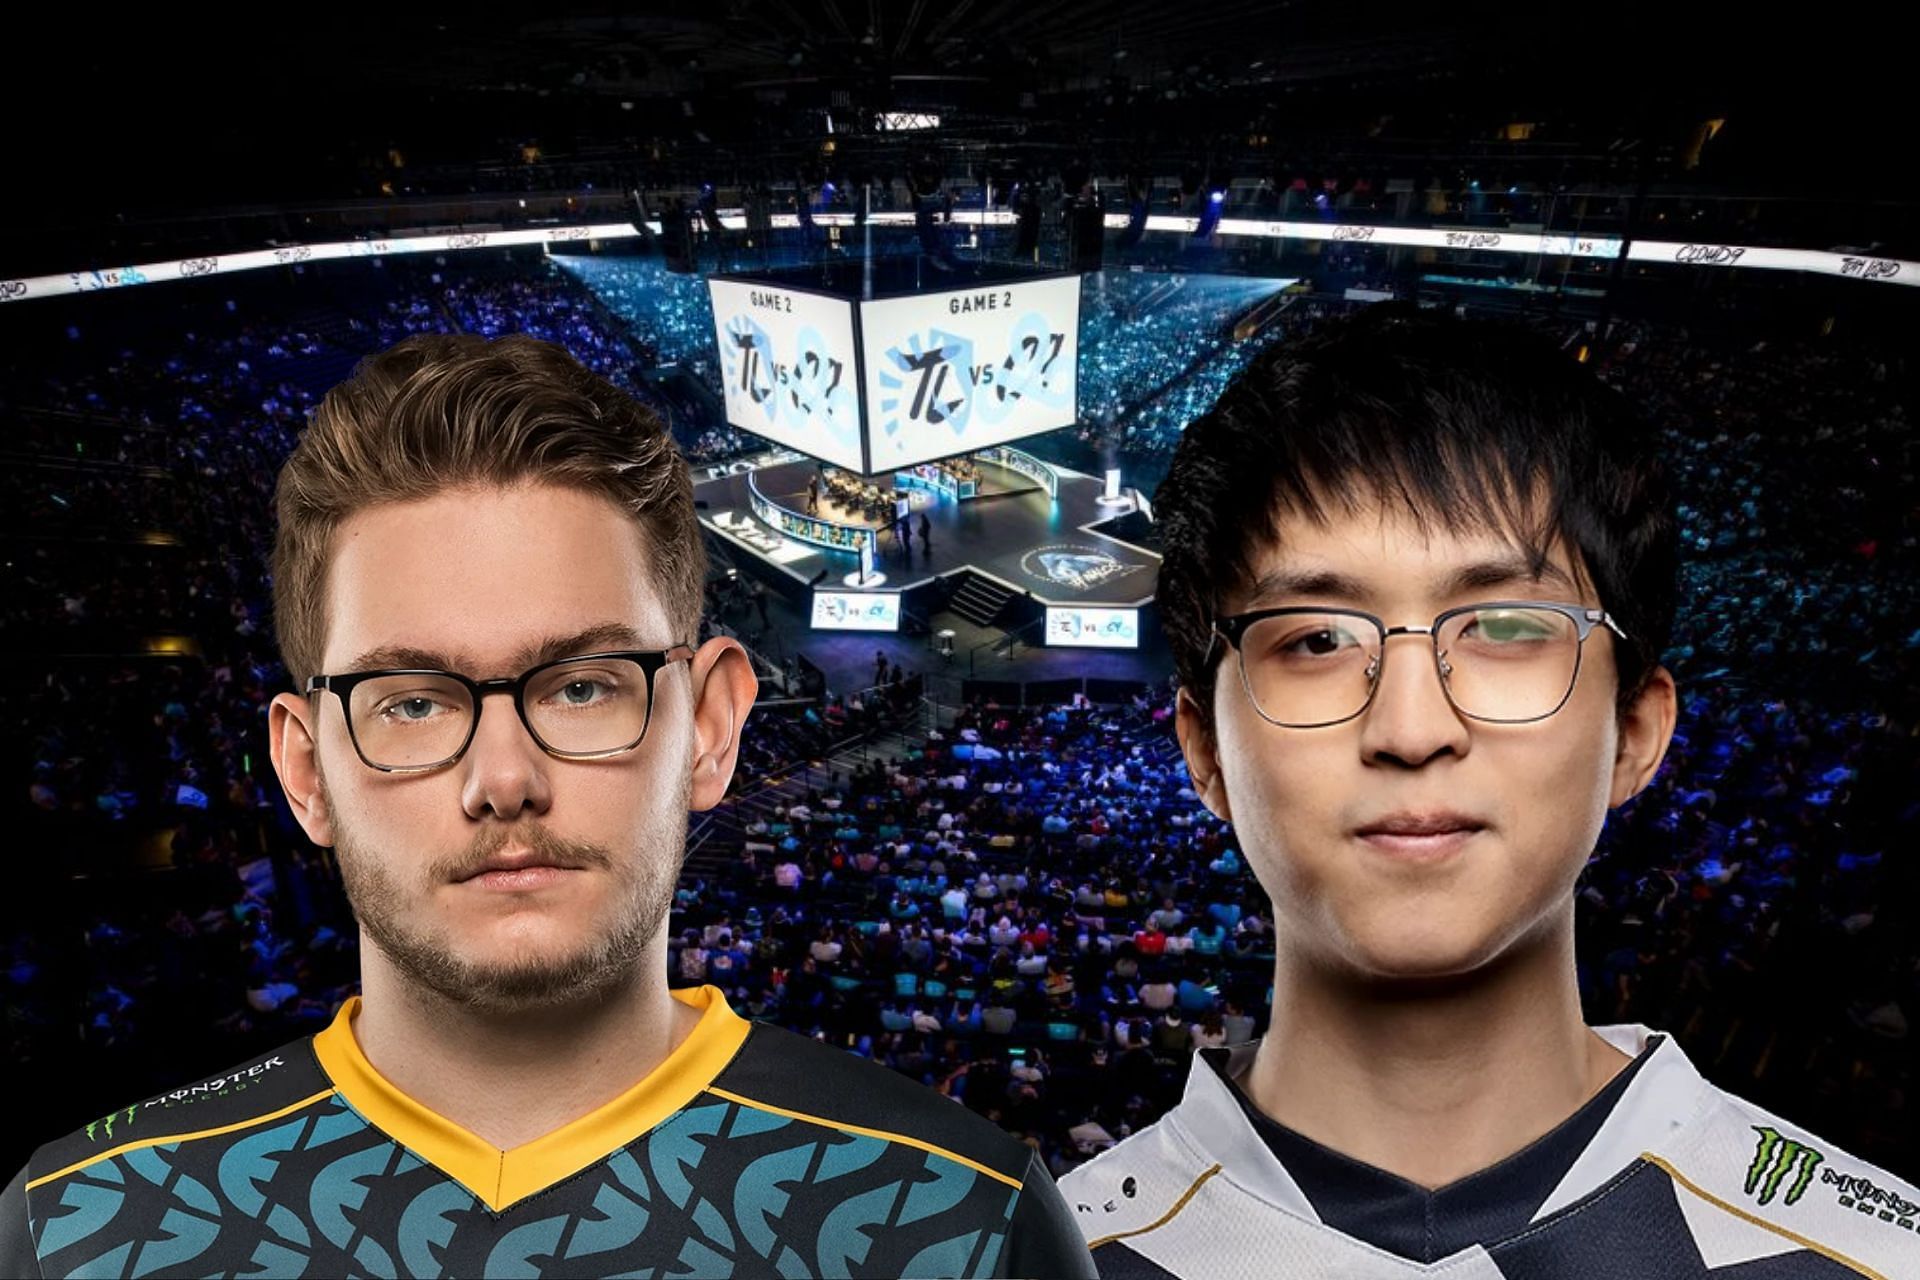 Inspired vs Hans Sama will be the featured match-up when Evil Geniuses face Team Liquid at the LCS 2022 Spring lower bracket finals (Image via League of Legends)